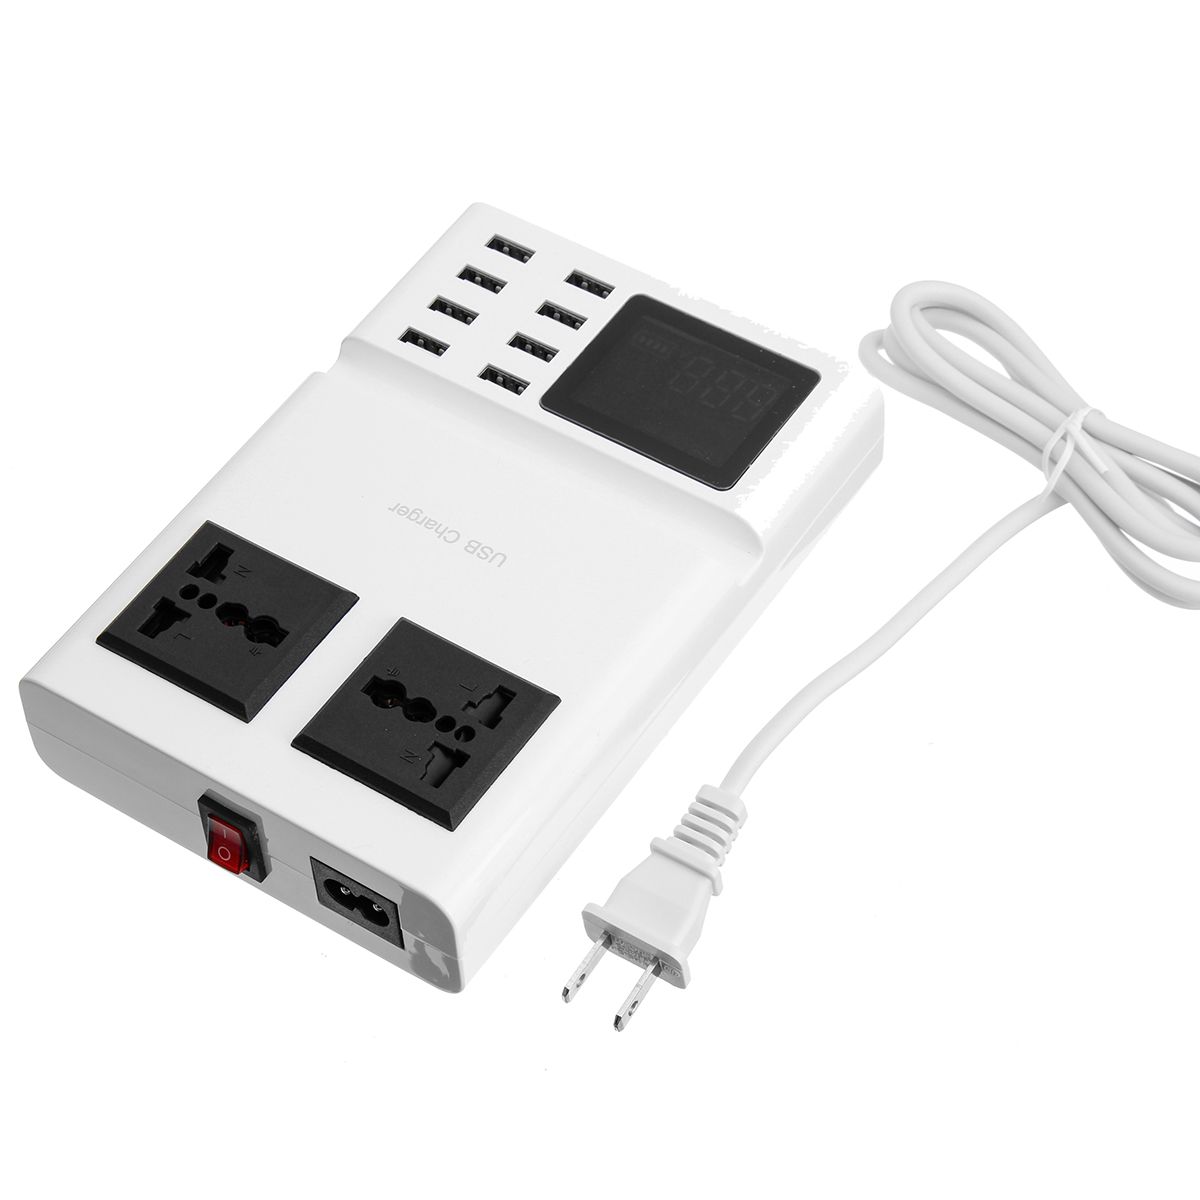 

8.2A 8 Port USB Charger Socket Rapid Fast Travel Wall Charger Station LCD Display